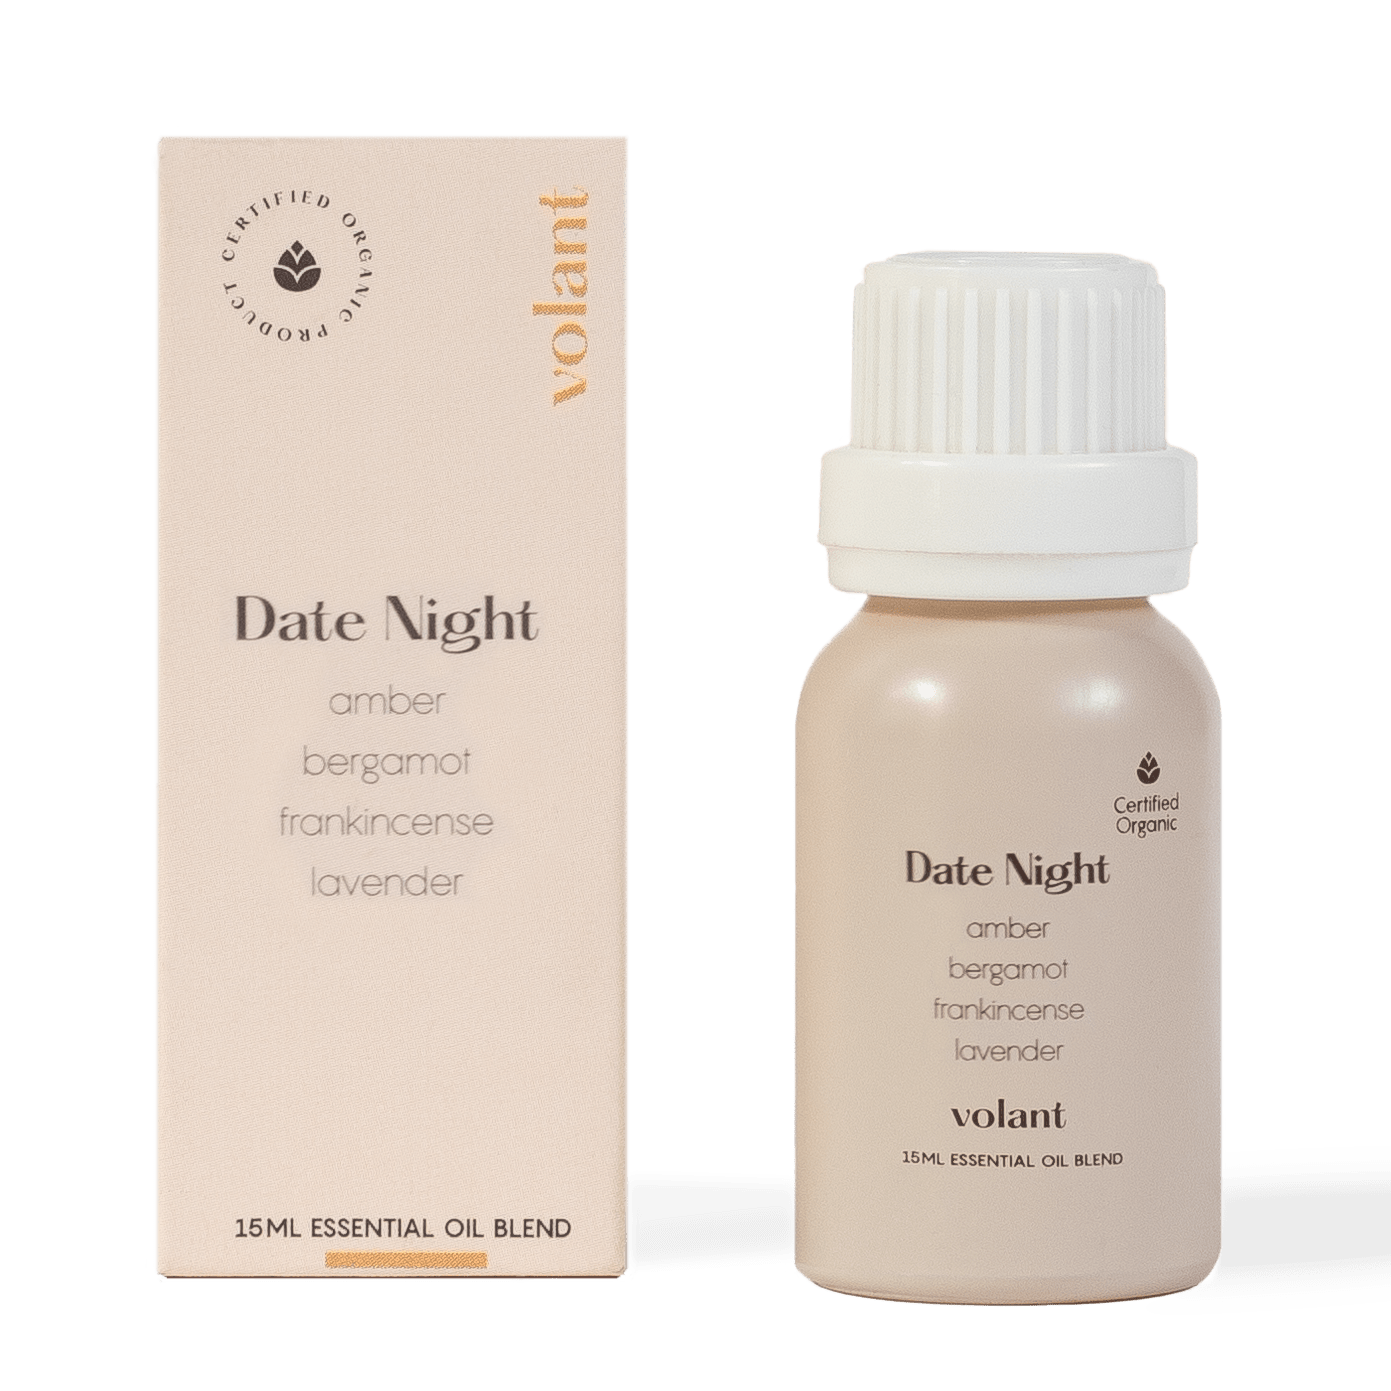 volant date night essential oil blend bottle packaging made with pure Amber, Lavender, Frankincense and Bergamot